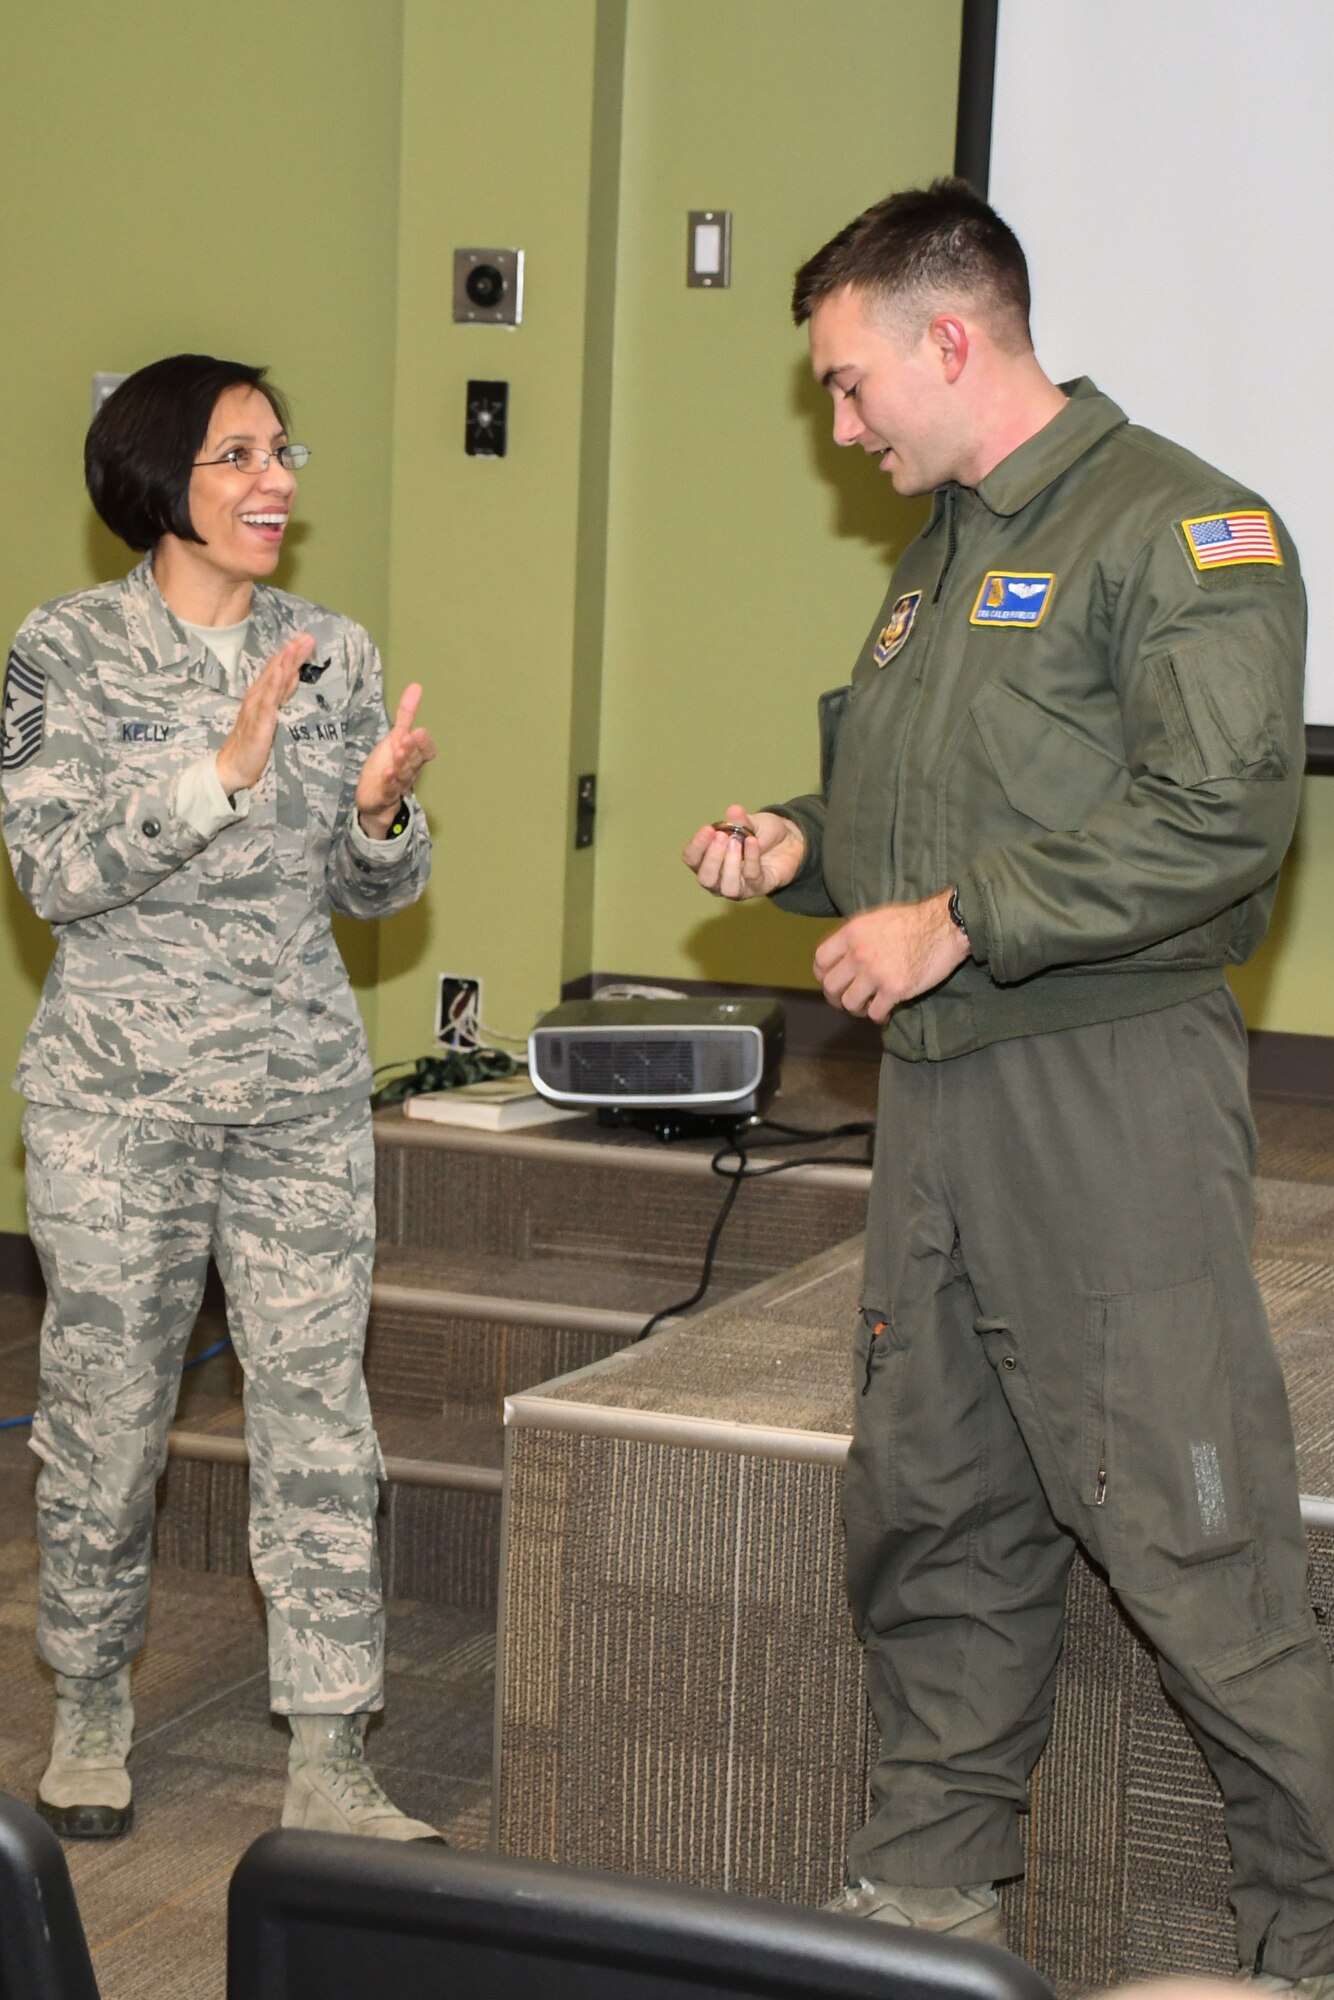 Chief Master Sgt. Ericka Kelly, Air Force Reserve Command command chief master sergeant, coins Senior Airman Caleb Bowlick, a 700th Airlift Squadron loadmaster, at Dobbins Air Reserve Base, Ga, Jan. 7, 2018. Kelly visited Dobbins to tour the base and visit the units, as well as host question and answer sessions. (U.S. Air Force photo by Senior Airman Lauren Douglas)